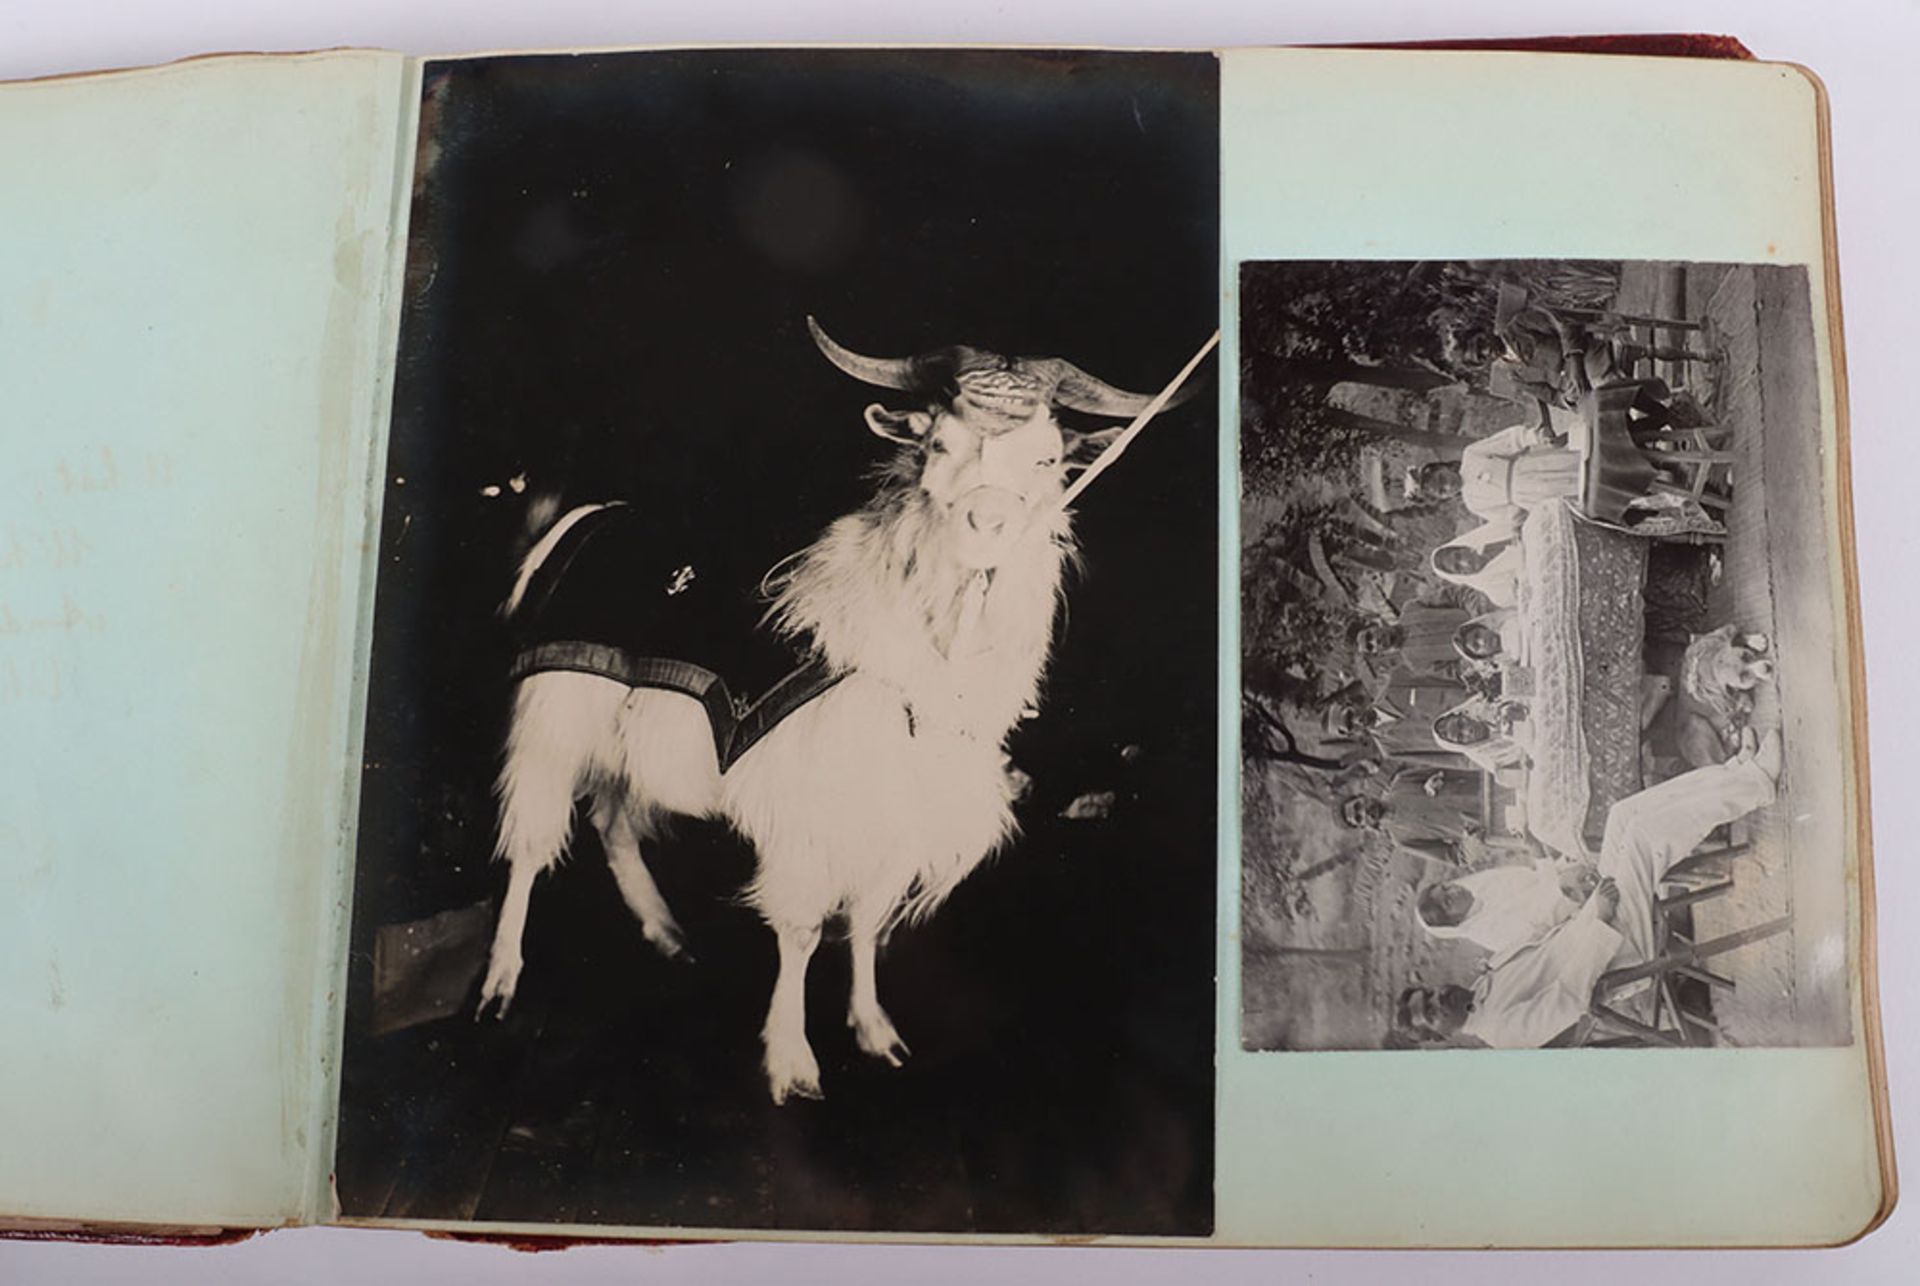 Photograph Album with images of ther Delhi Durbar, troops lining streets, Elephants, sacred cows bel - Image 17 of 48